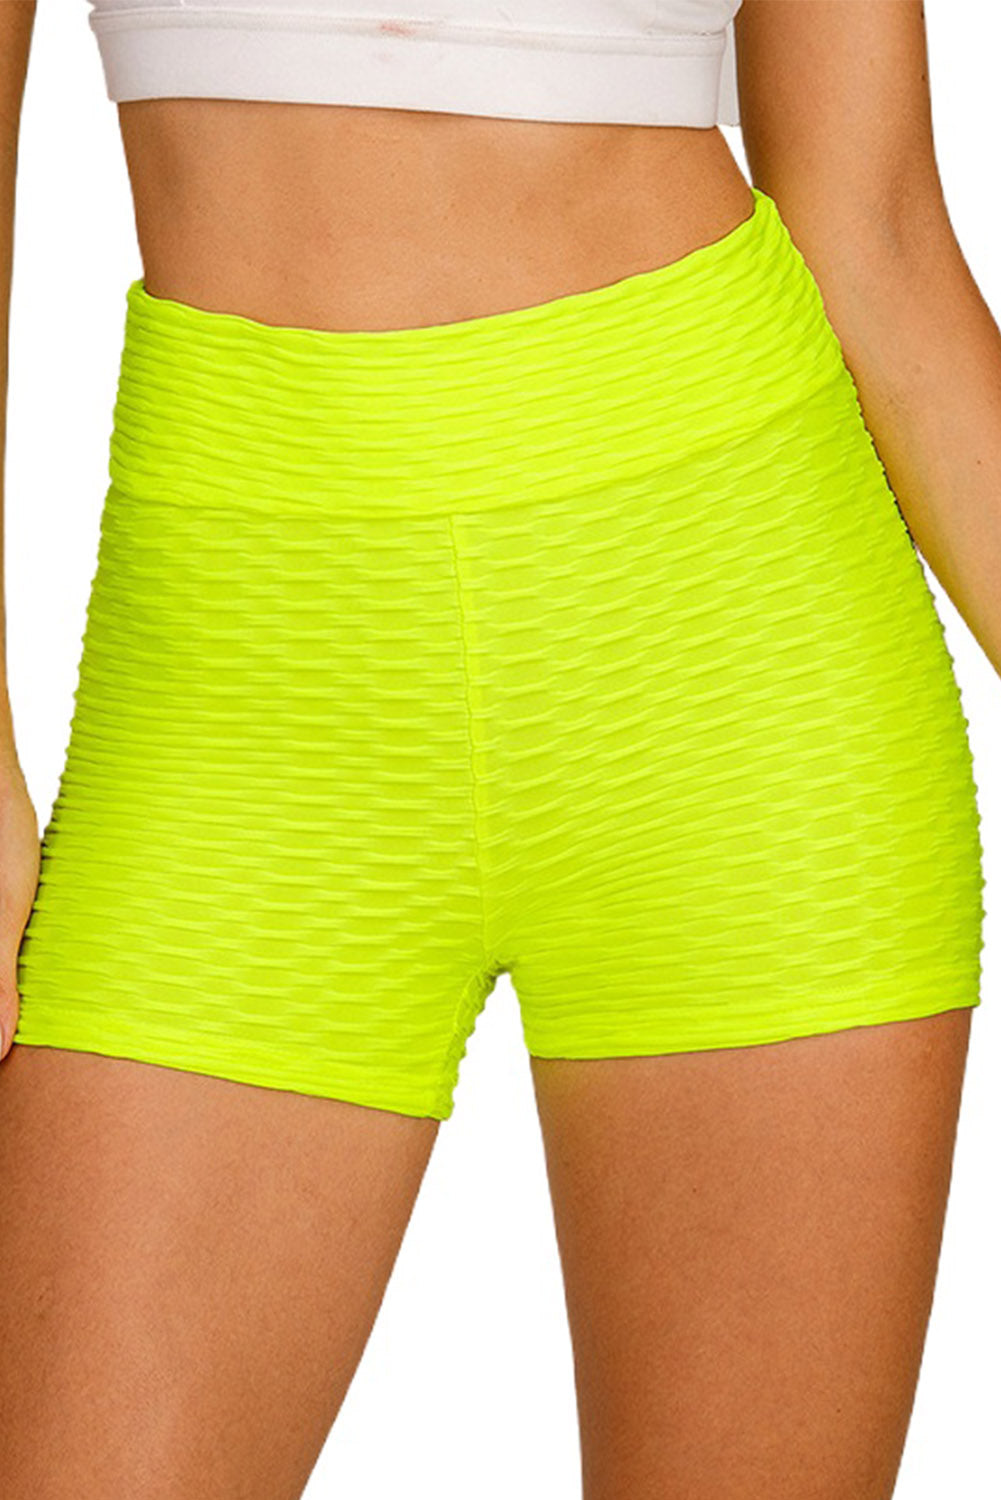 Green High Waisted Yoga Fitness Shorts for Women LC263790-9